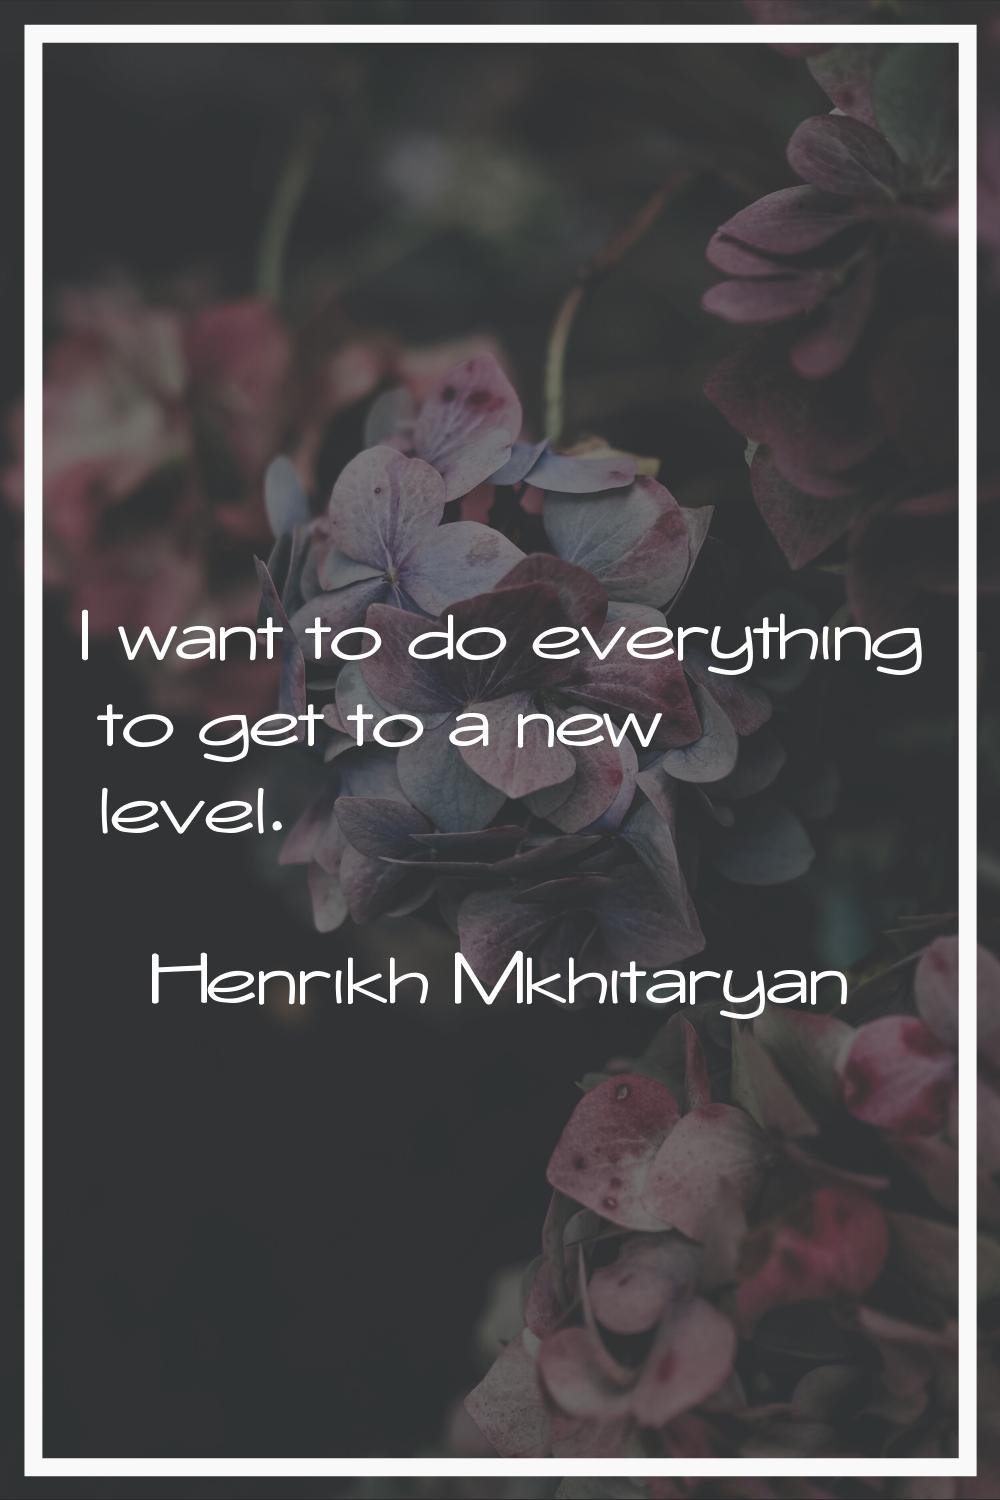 I want to do everything to get to a new level.